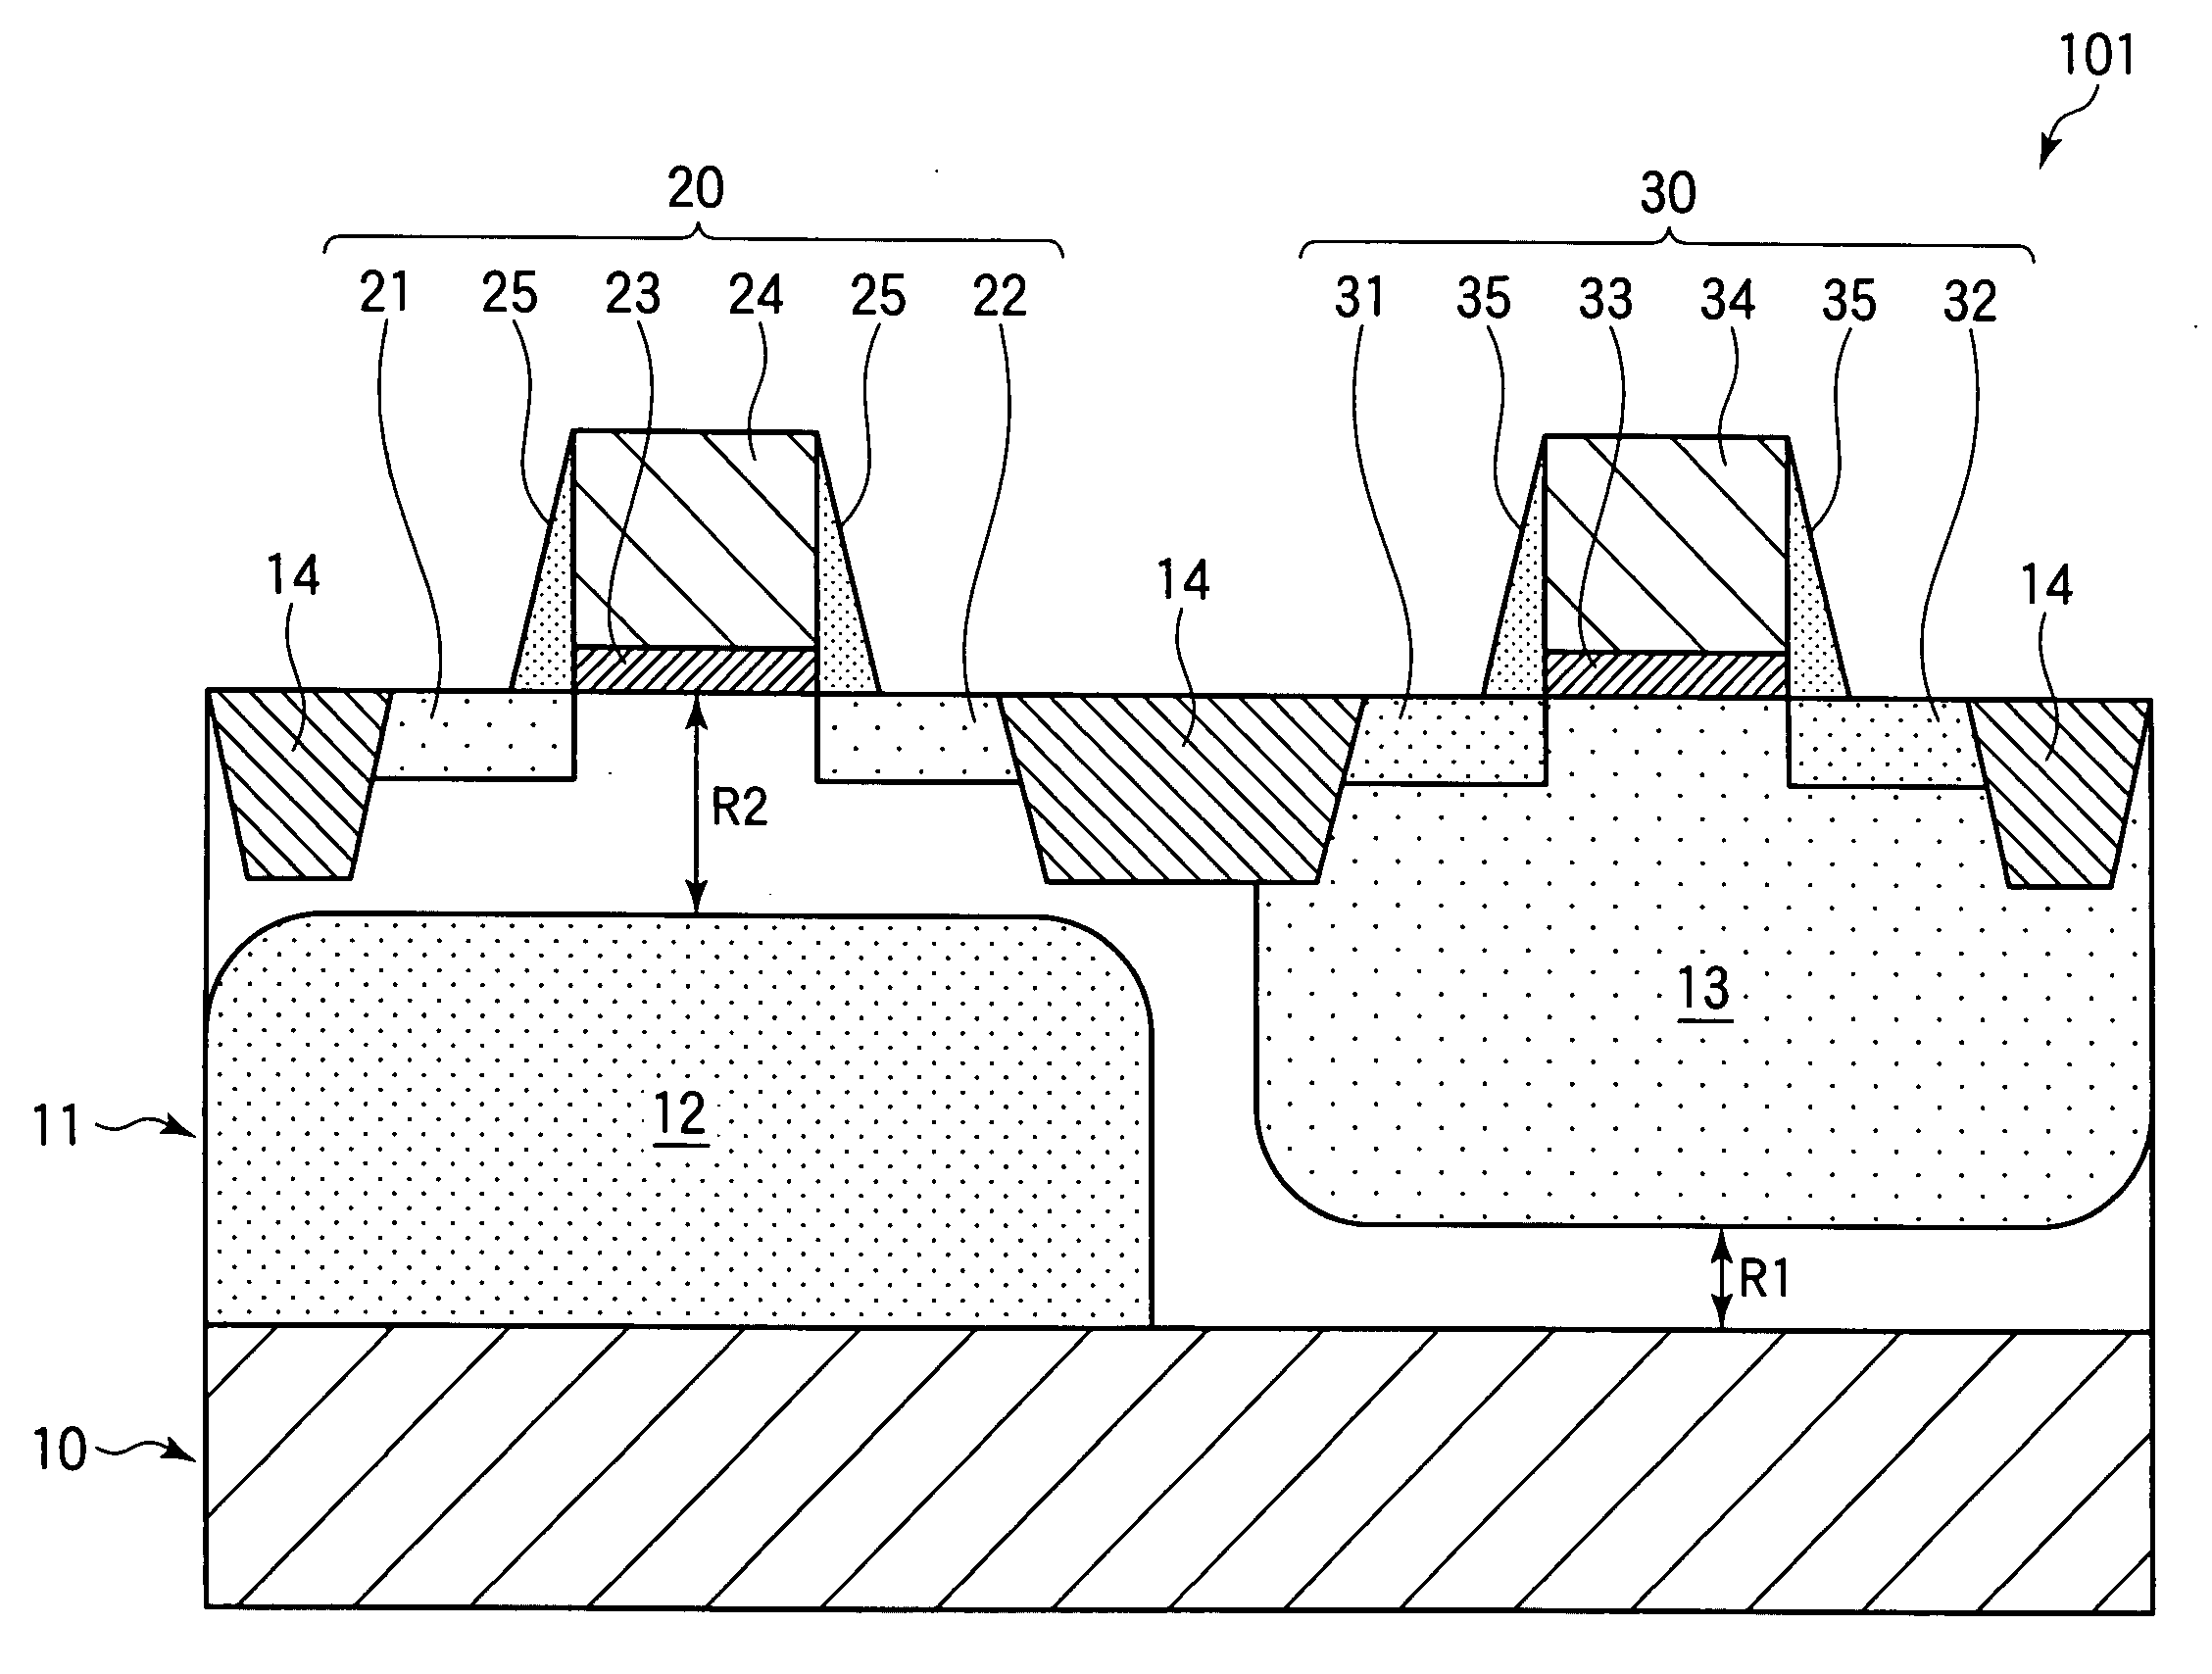 Semiconductor memory device using hot electron injection